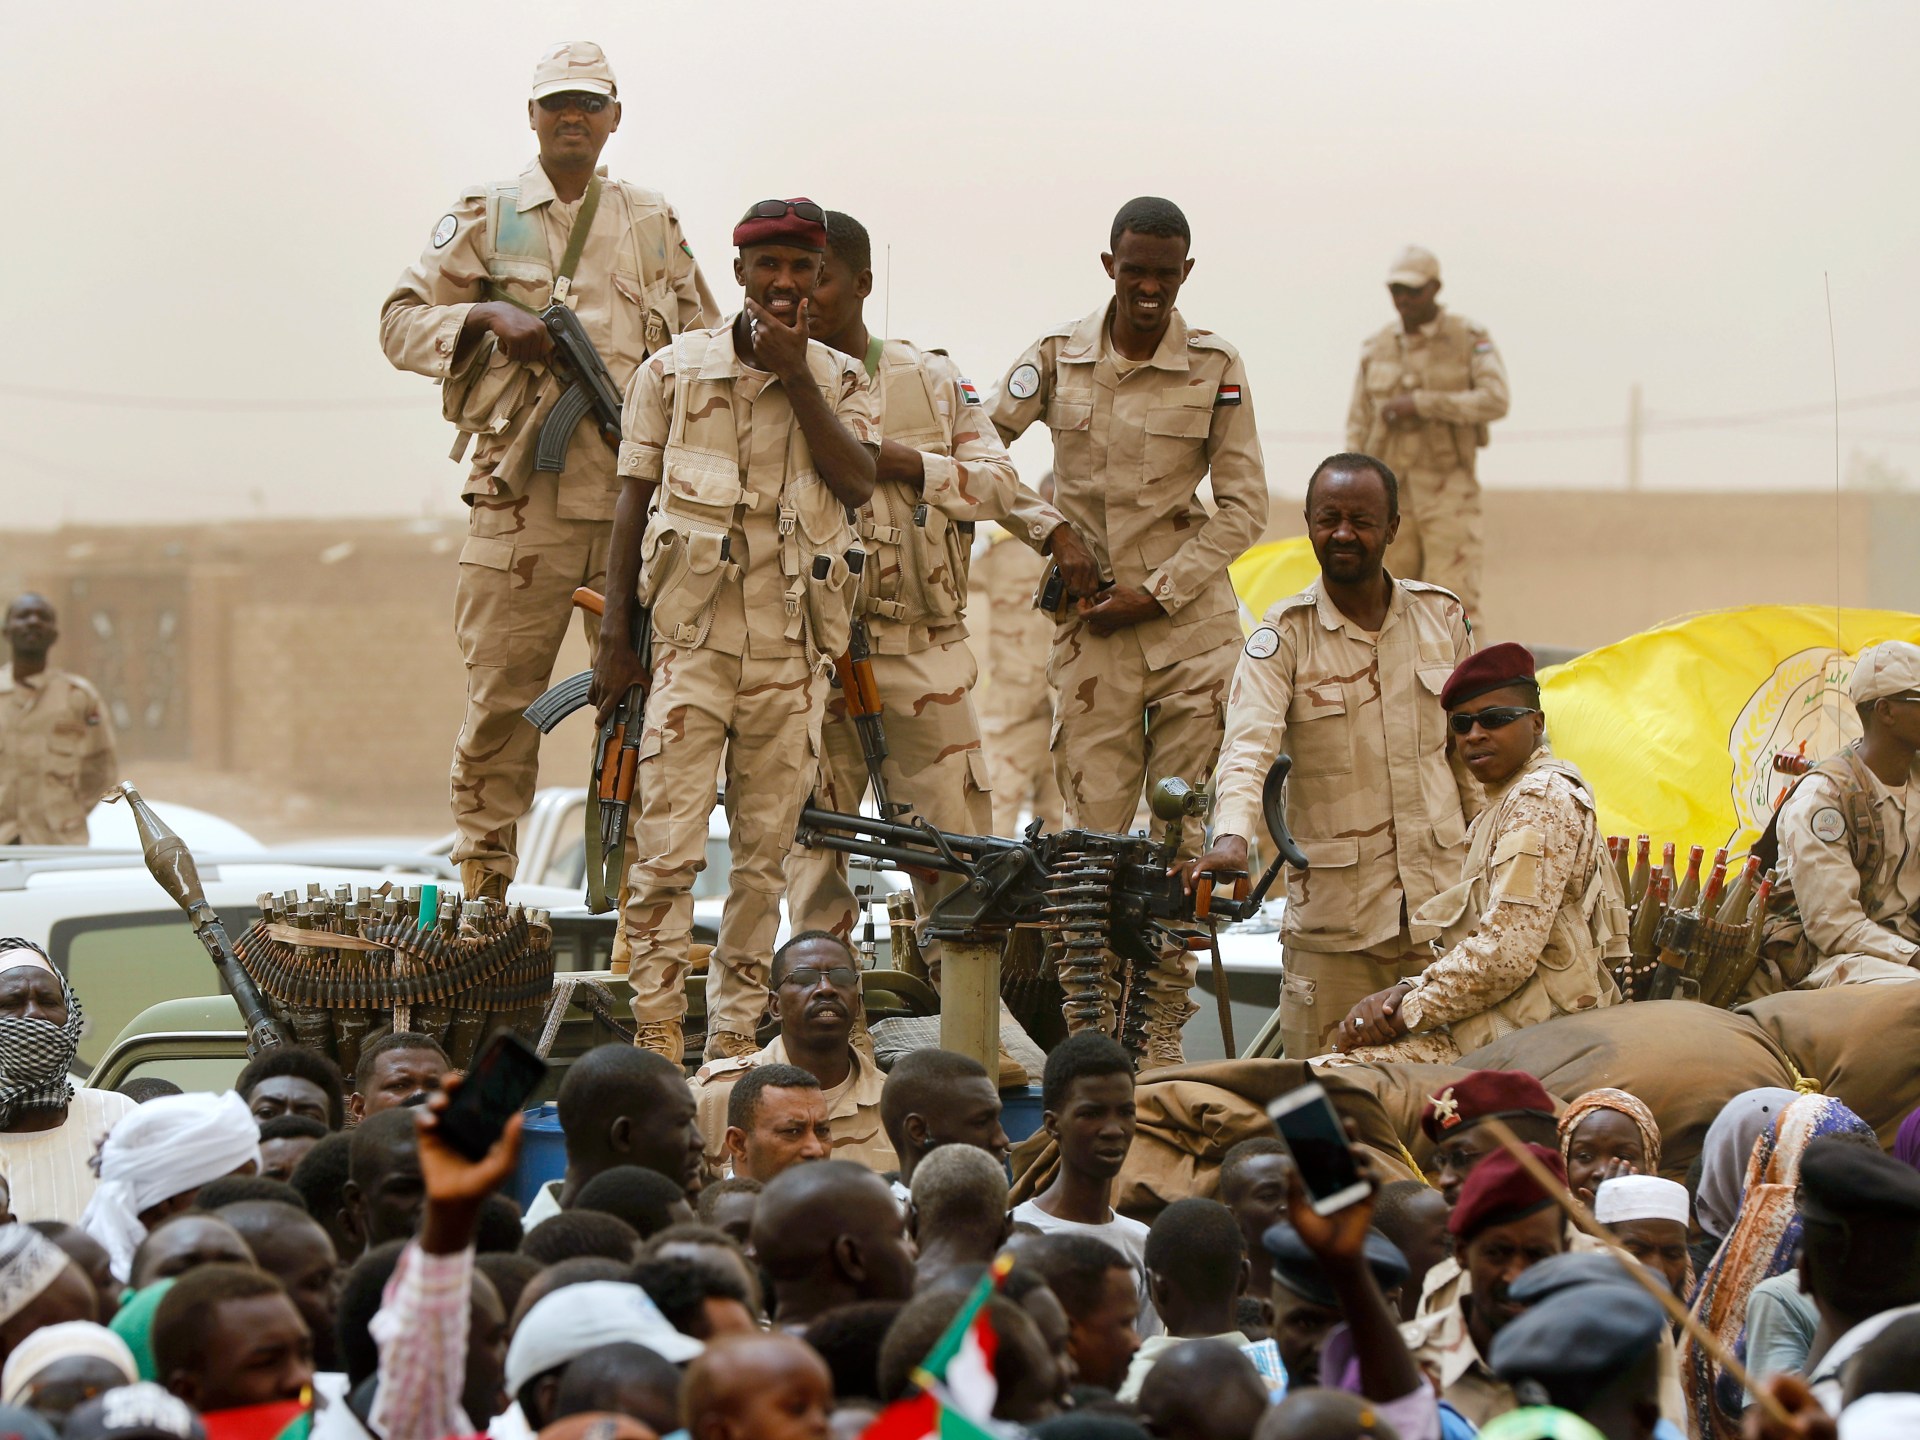 Sudan’s armed rivals fight on another front, international legitimacy